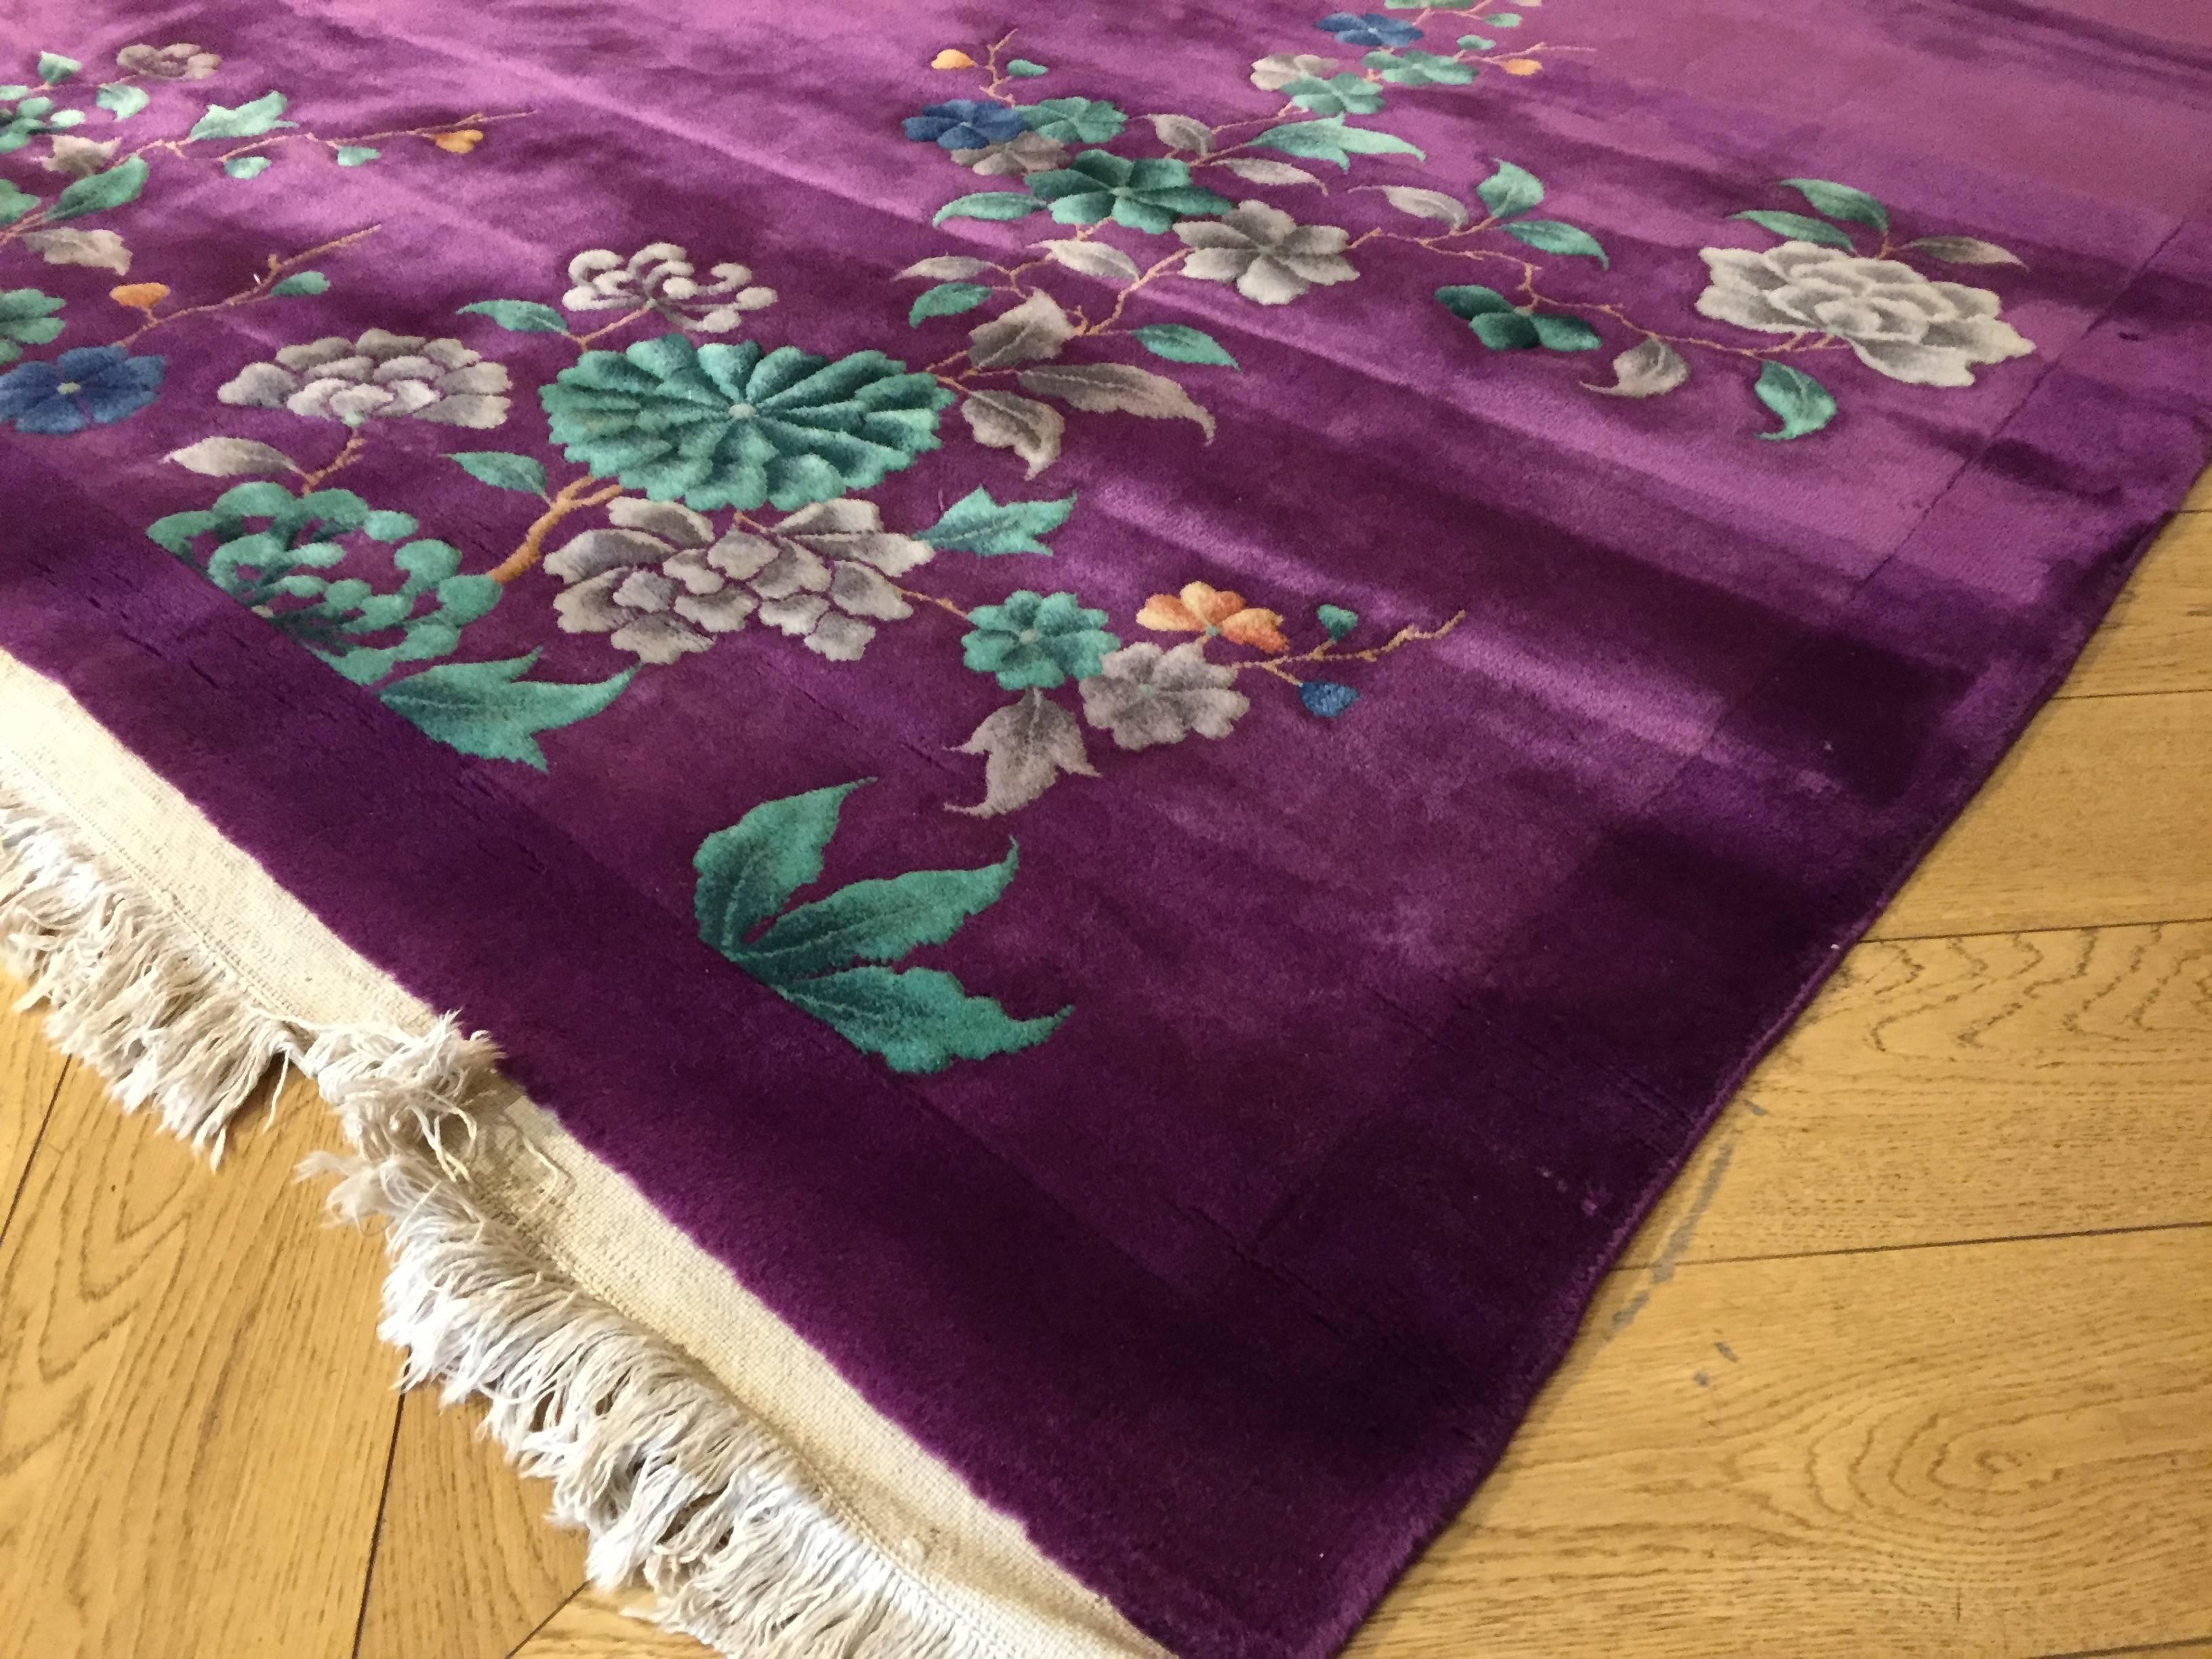 20th Century 1920-1940 Nichols Art Deco Chinese Rug Hand-Knotted Wool Violet 2